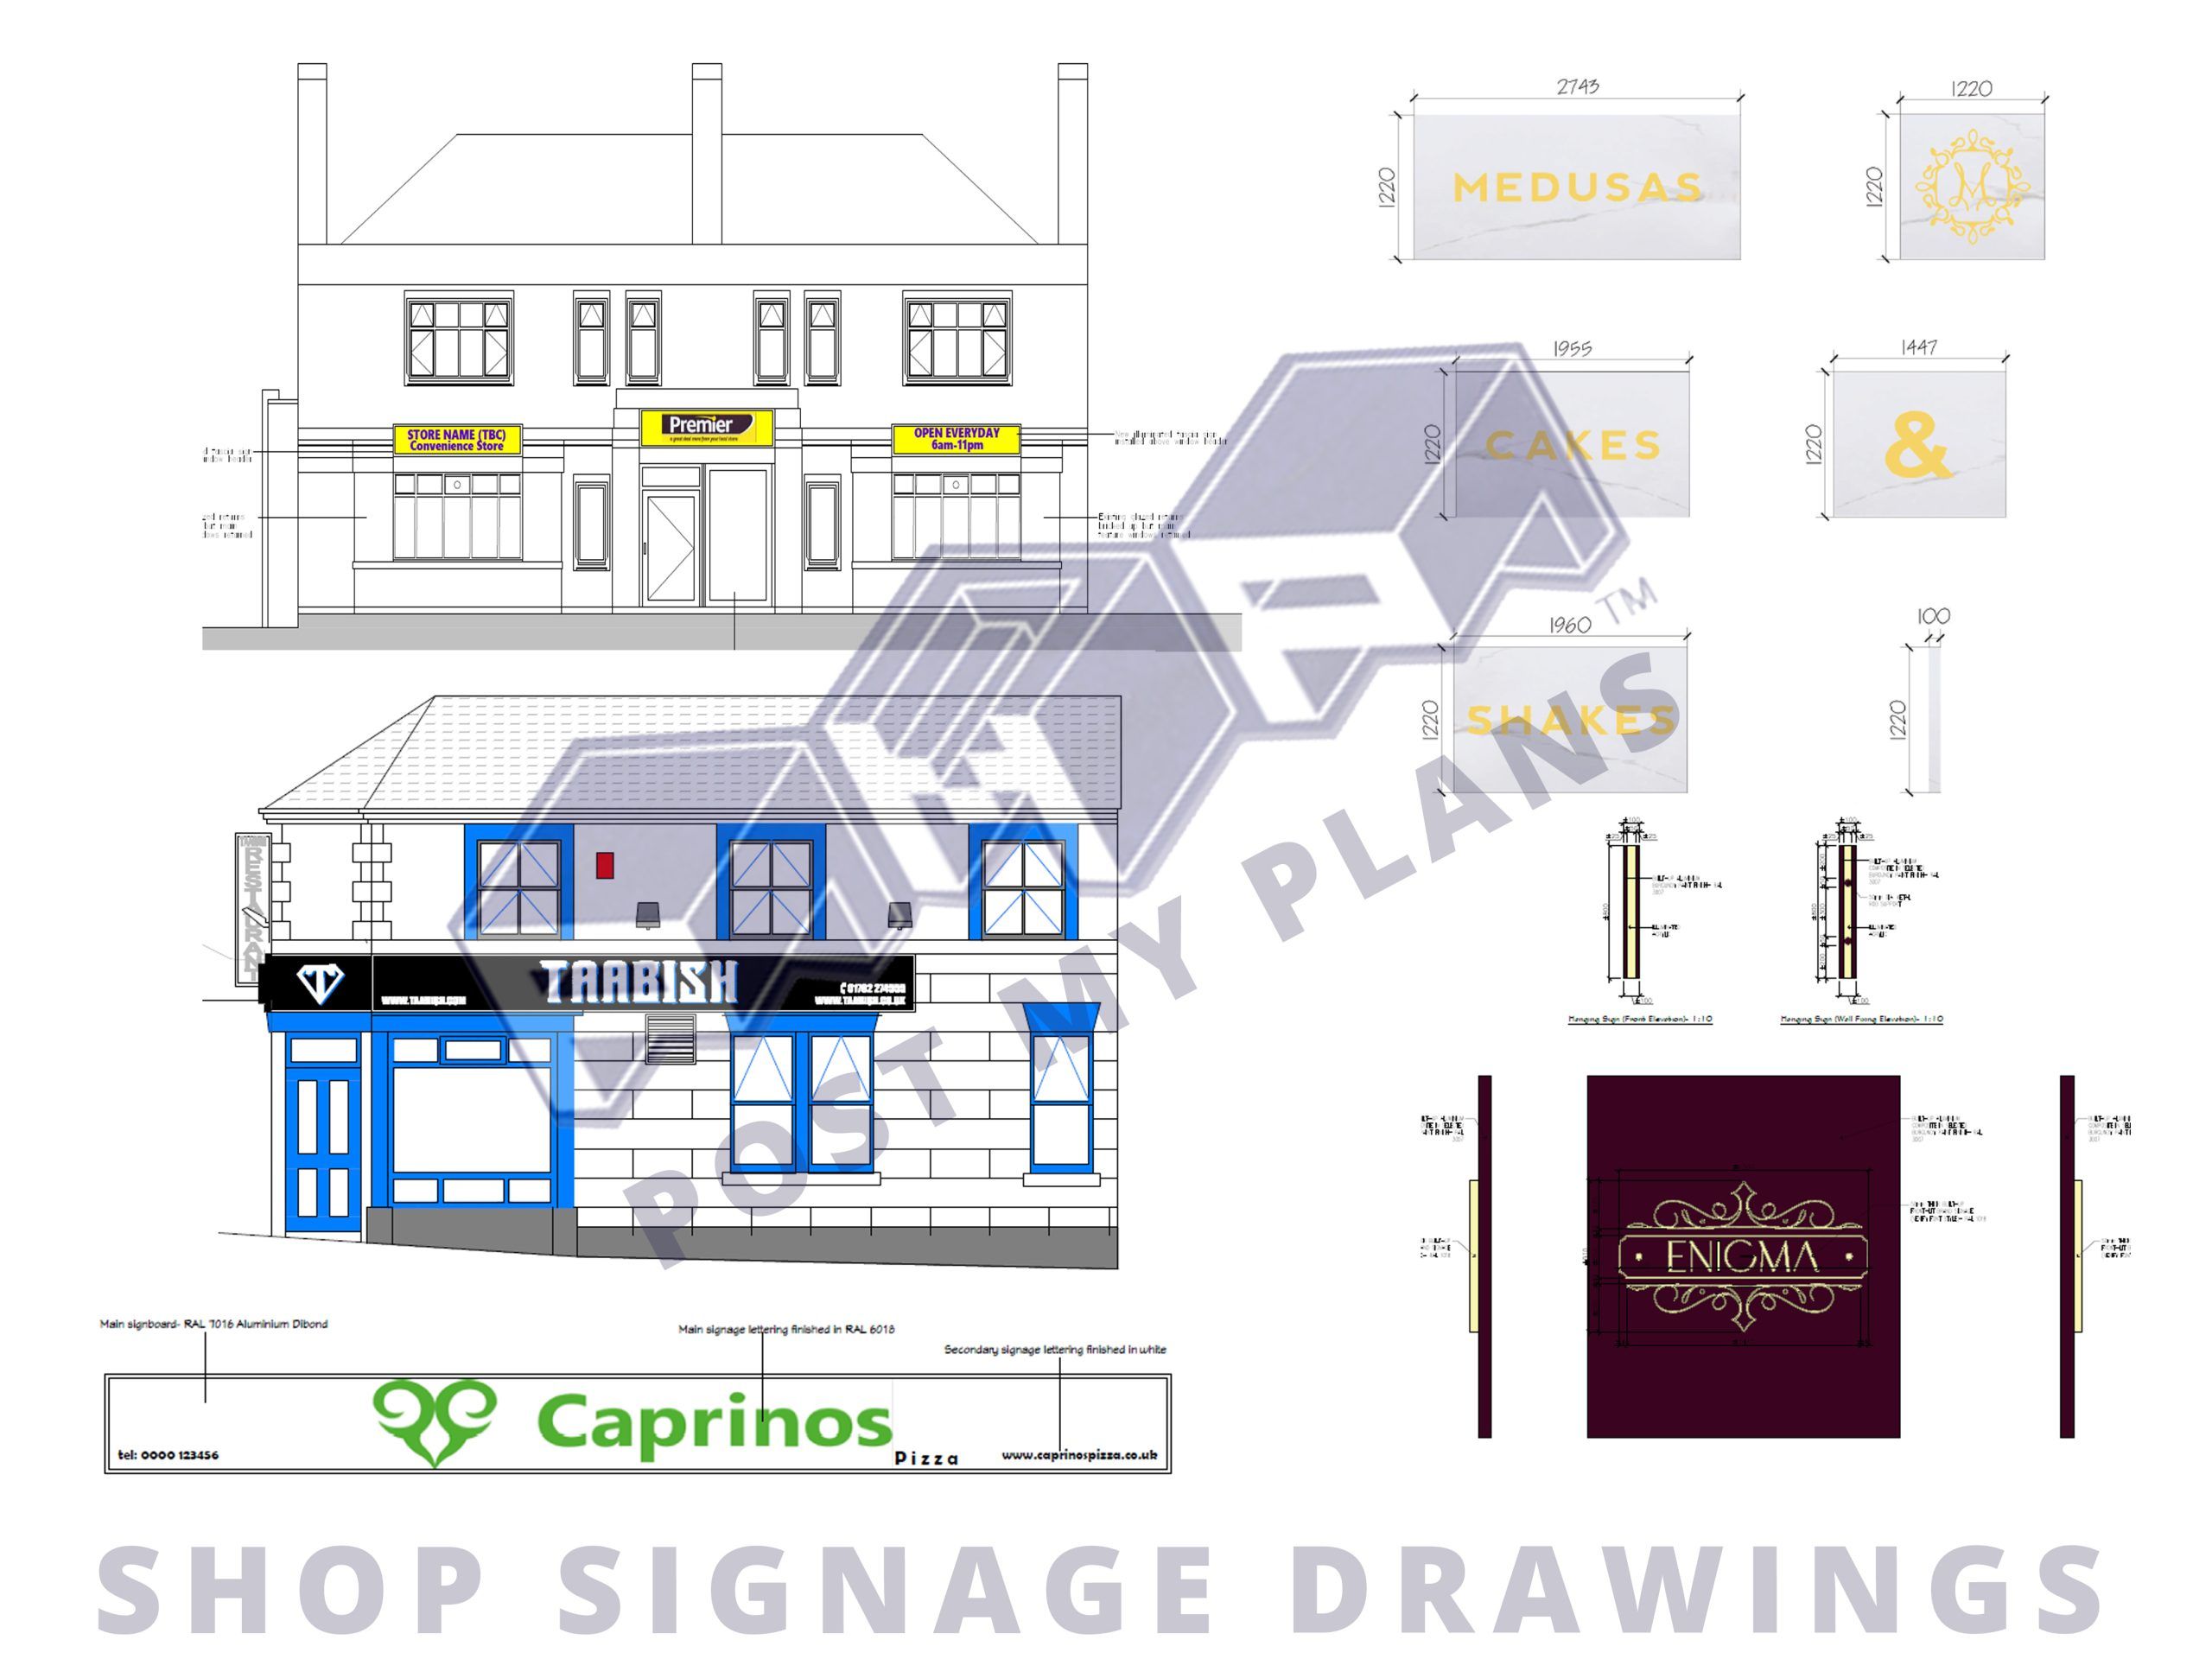 shop signage drawings scaled 70828dd0